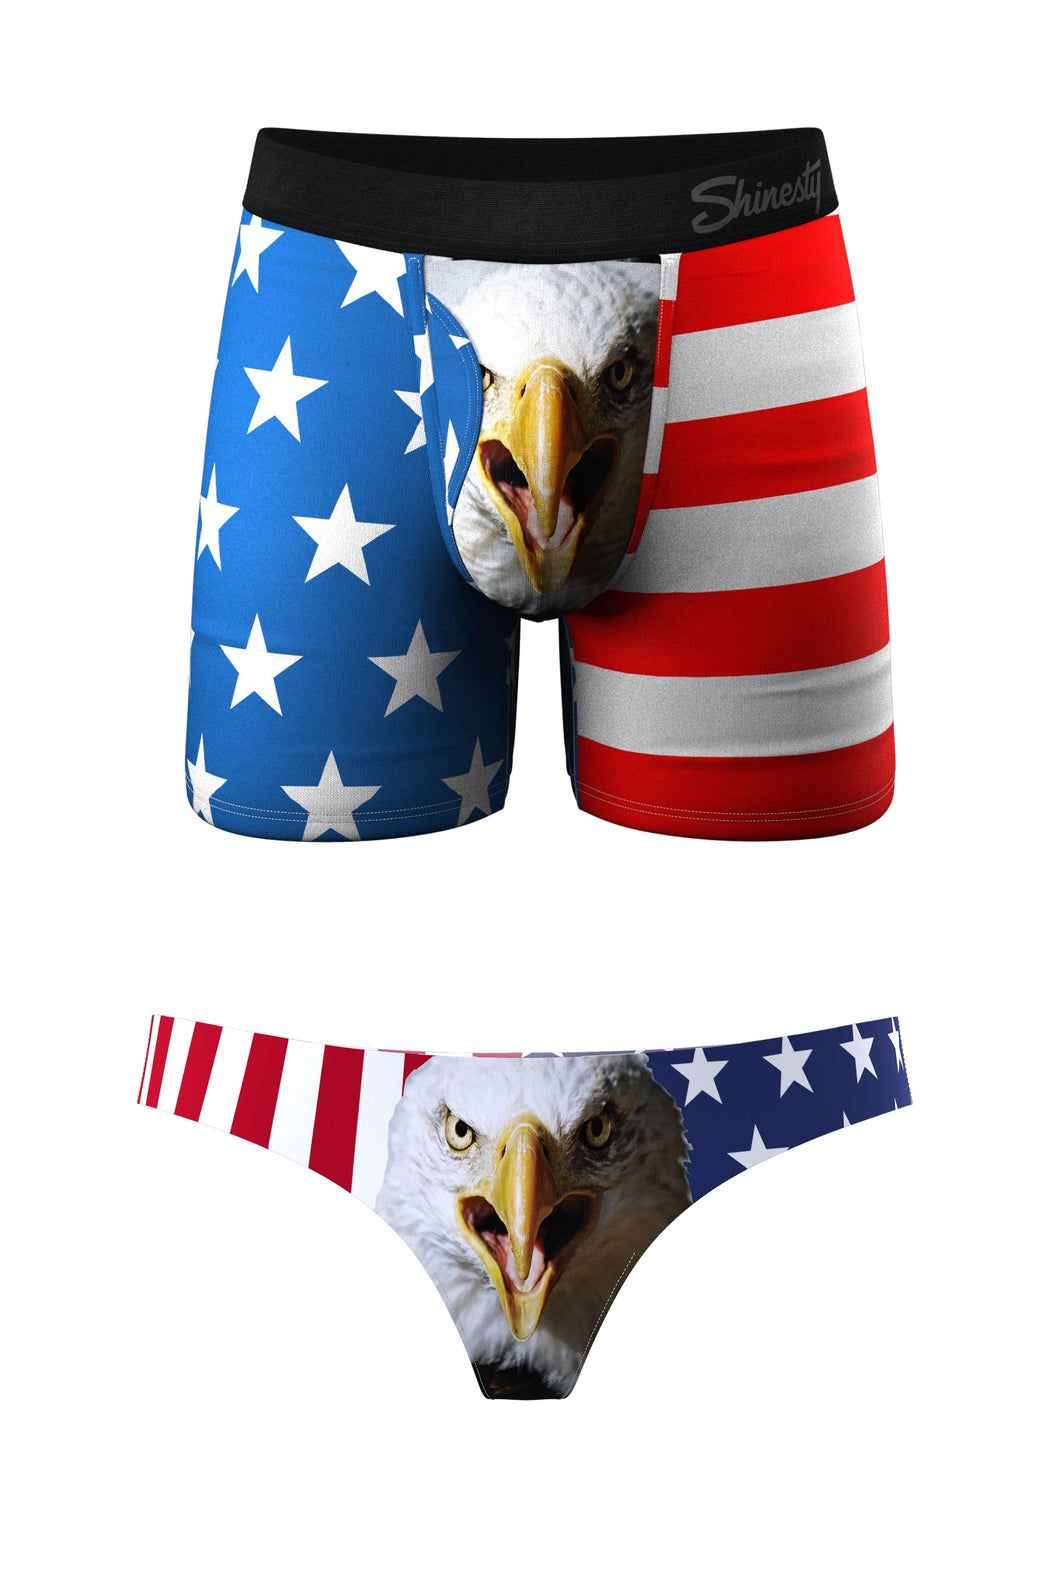 The Patriotic pair ball hammock with fly thong pack